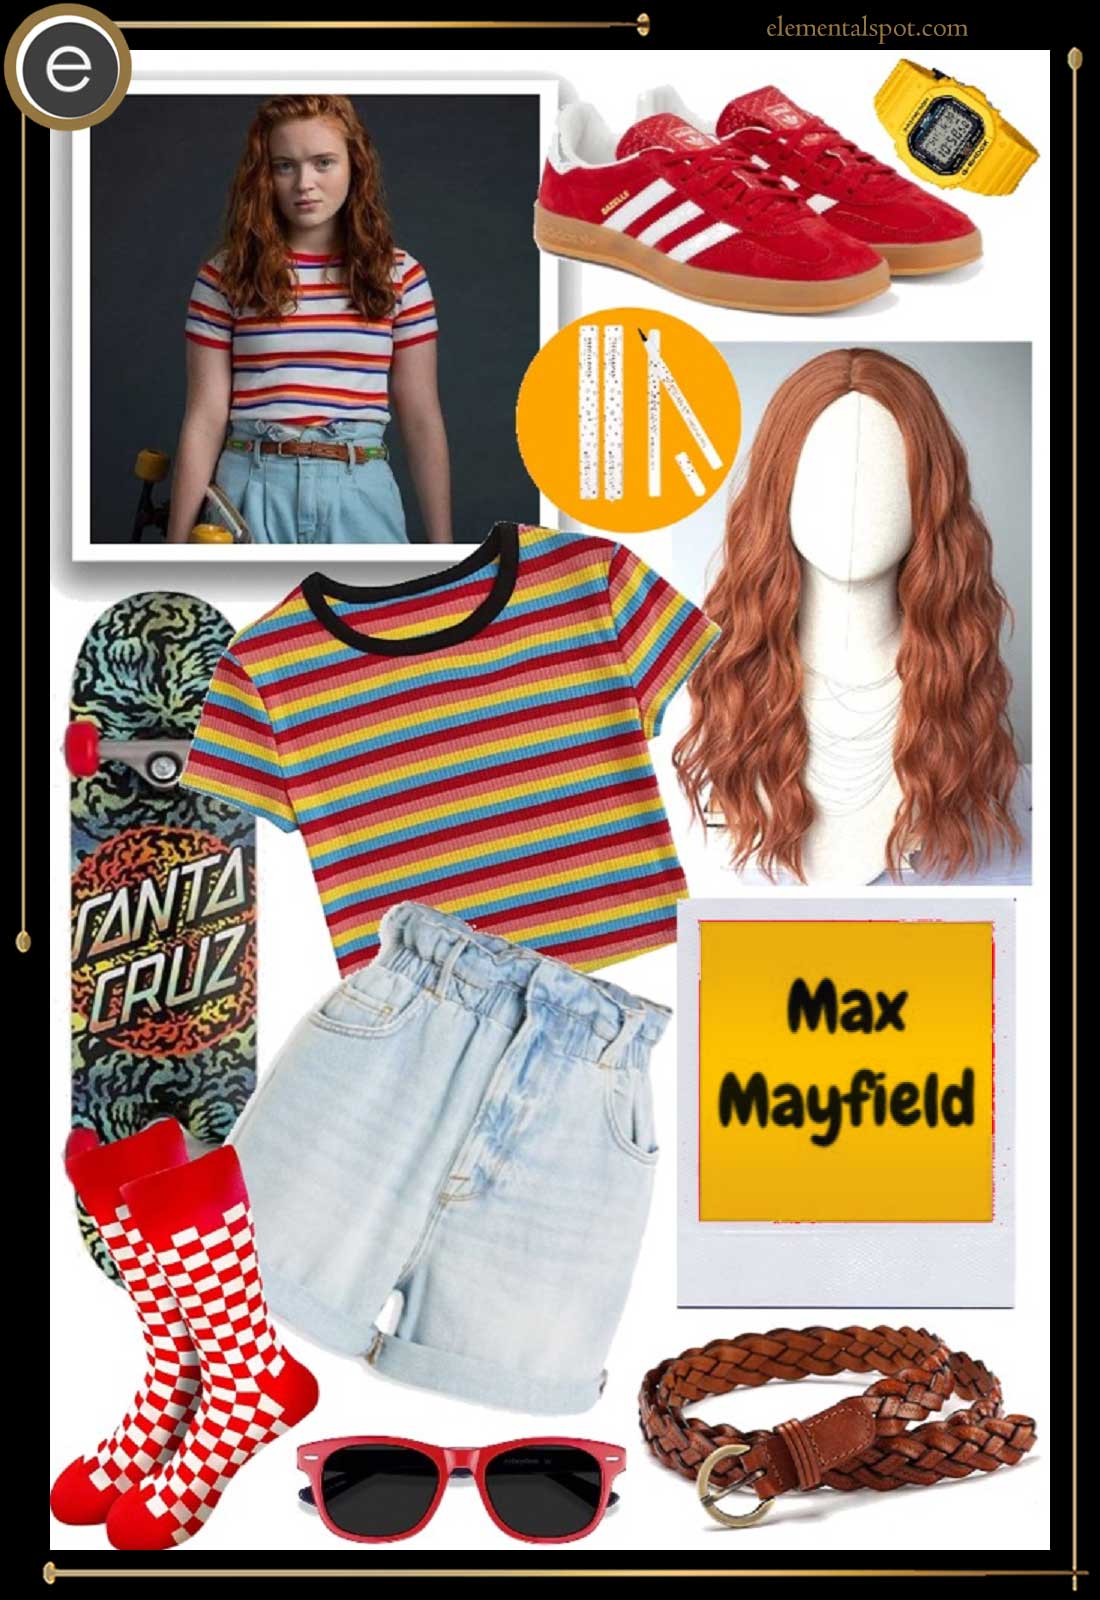 Dress Up Like Max Mayfield from Stranger Things - Elemental Spot